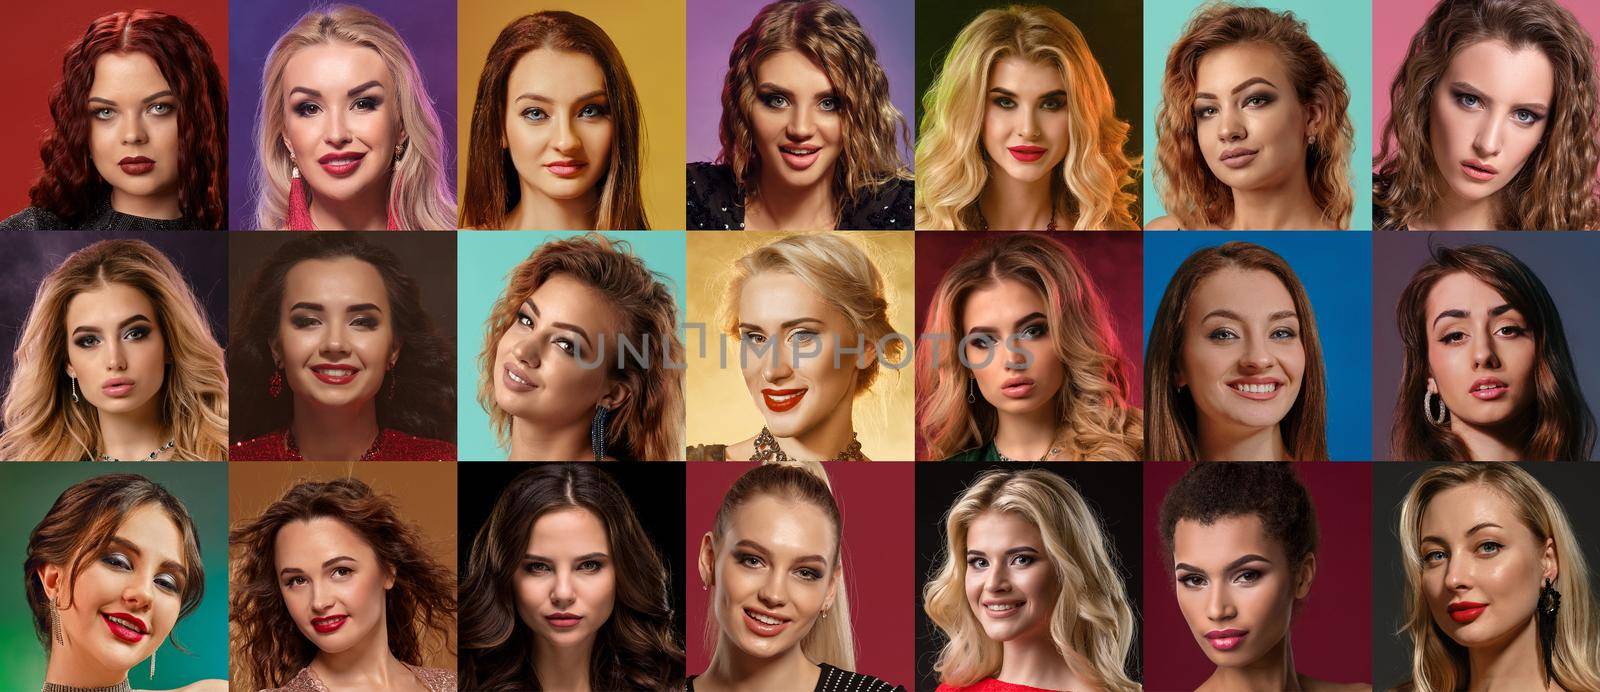 Collage of gorgeous women faces with bright make-up and hairstyles, expressing different facial emotions. Studio shot against colorful backgrounds